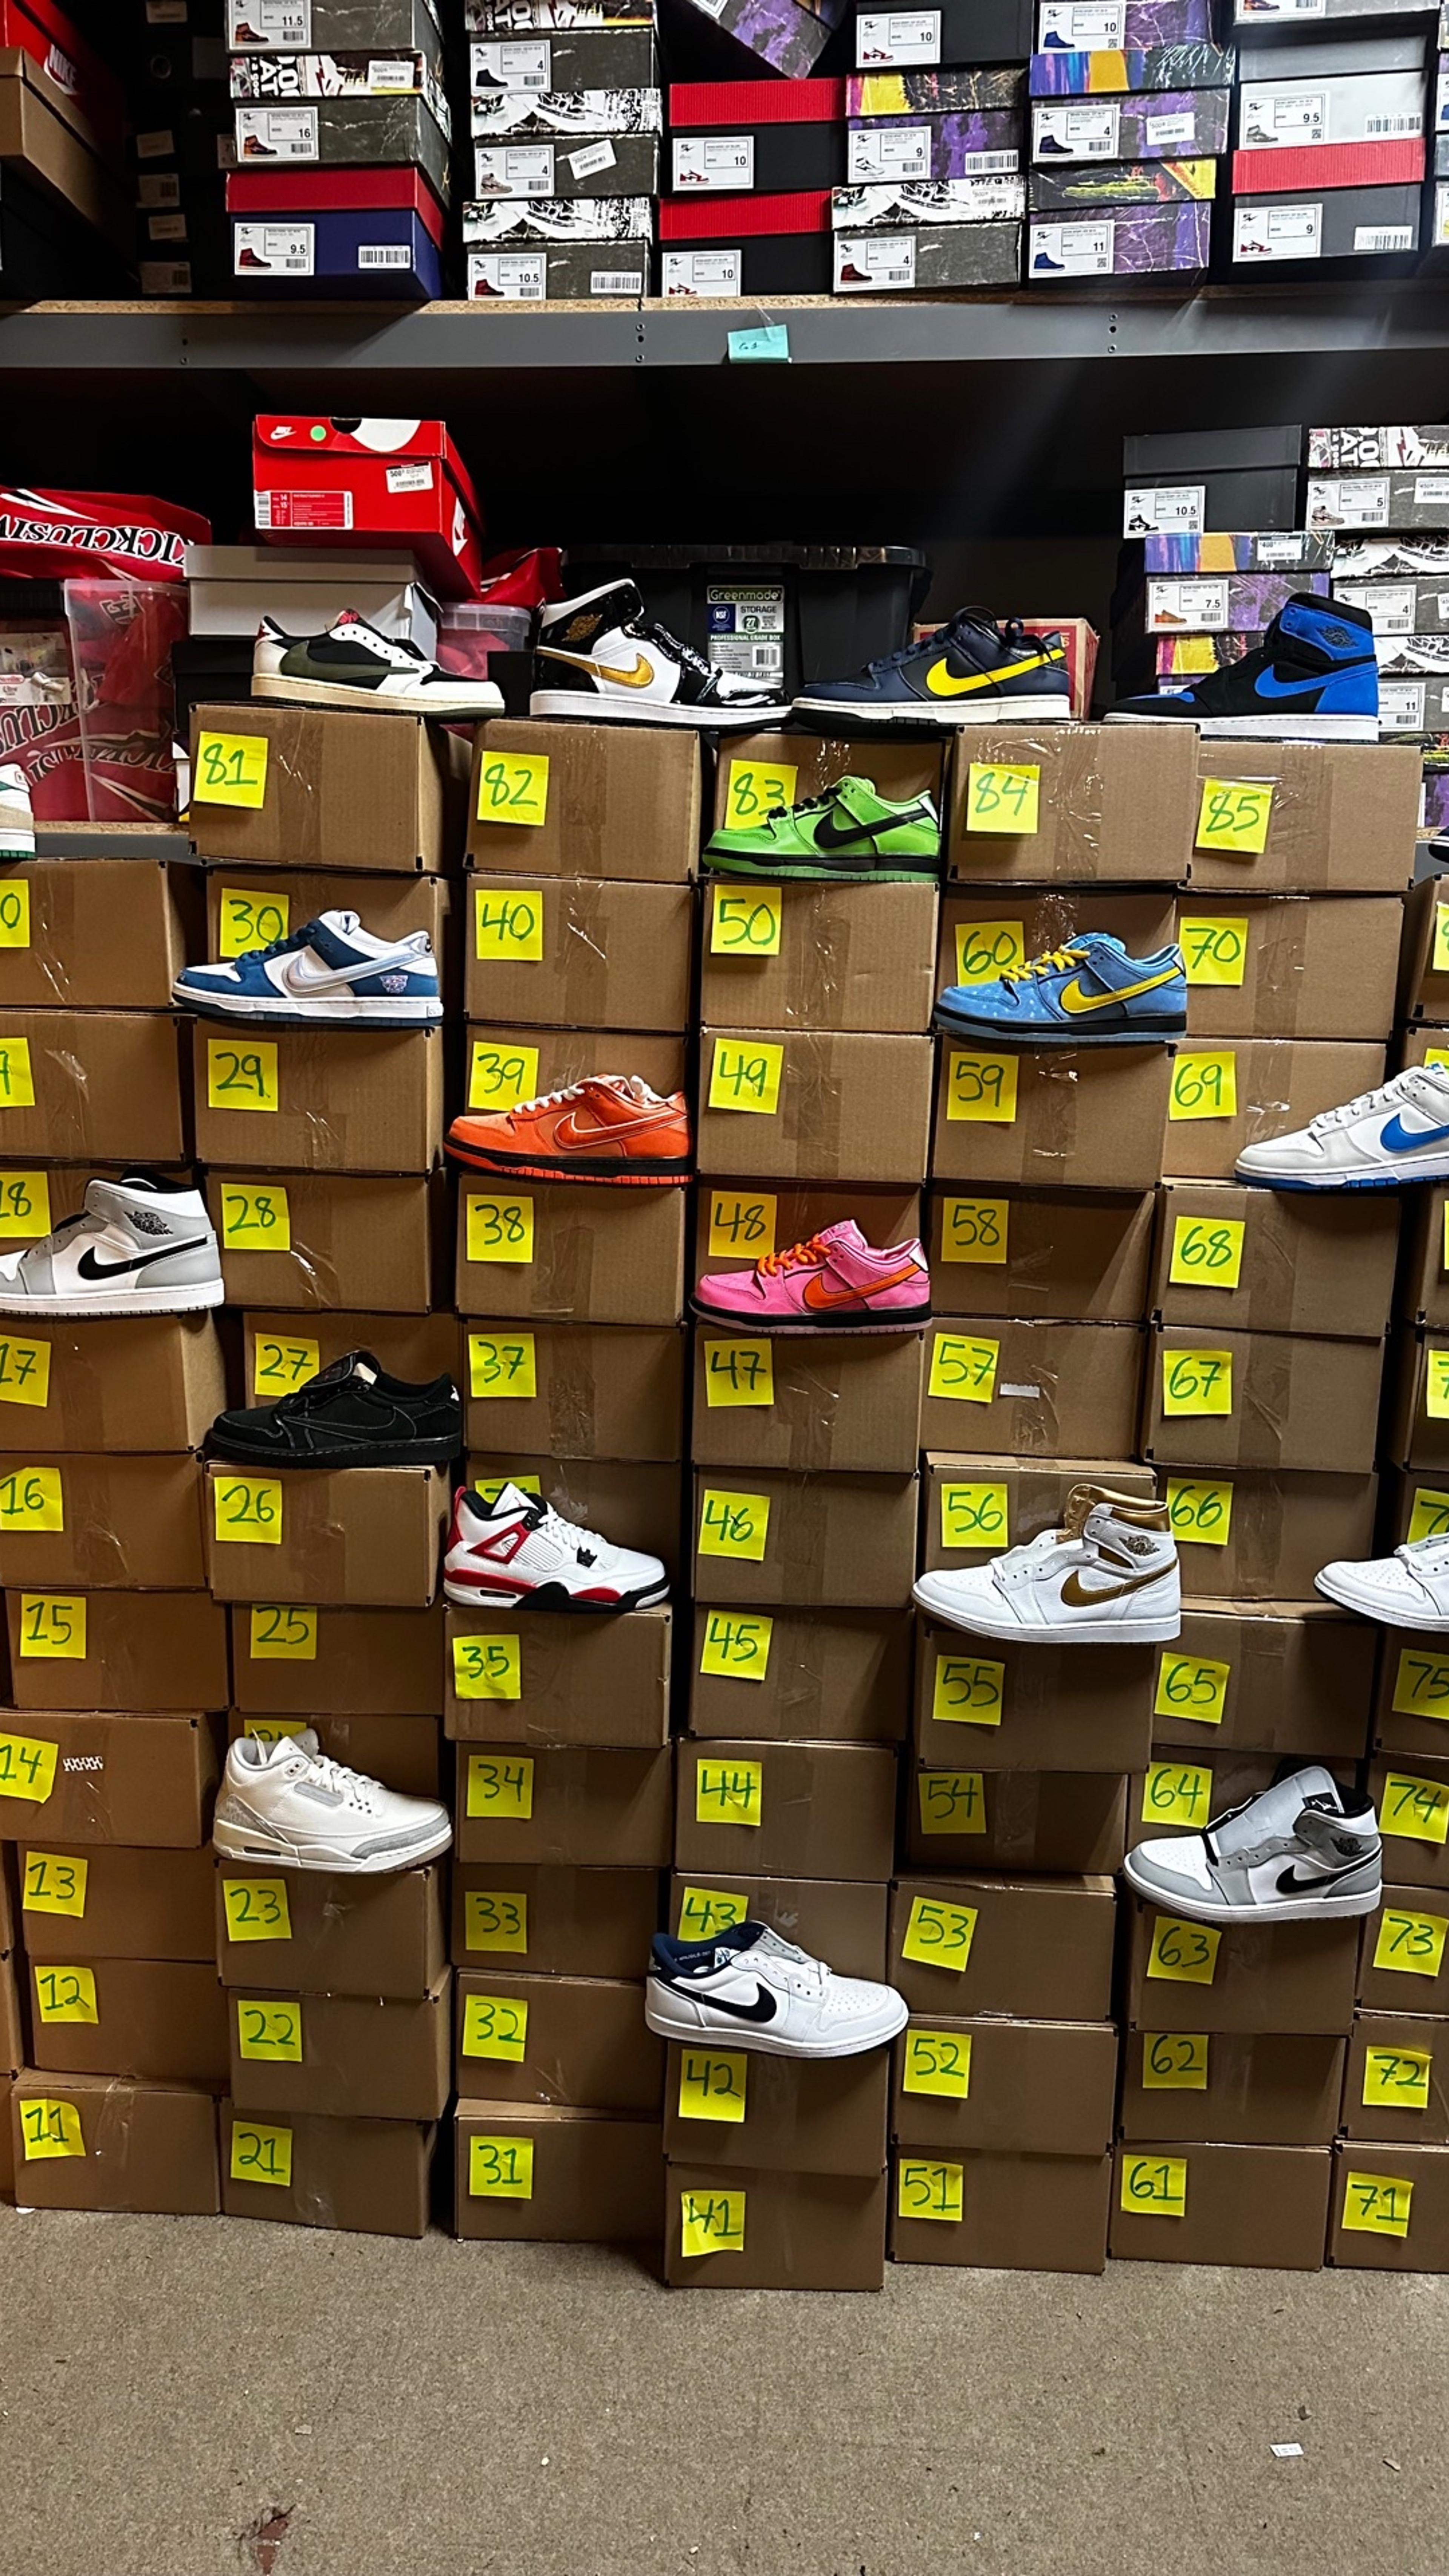 Preview image for the show titled "Every box has sneakers! Over $20,000 in prizes " at Tomorrow @ 12:00 AM